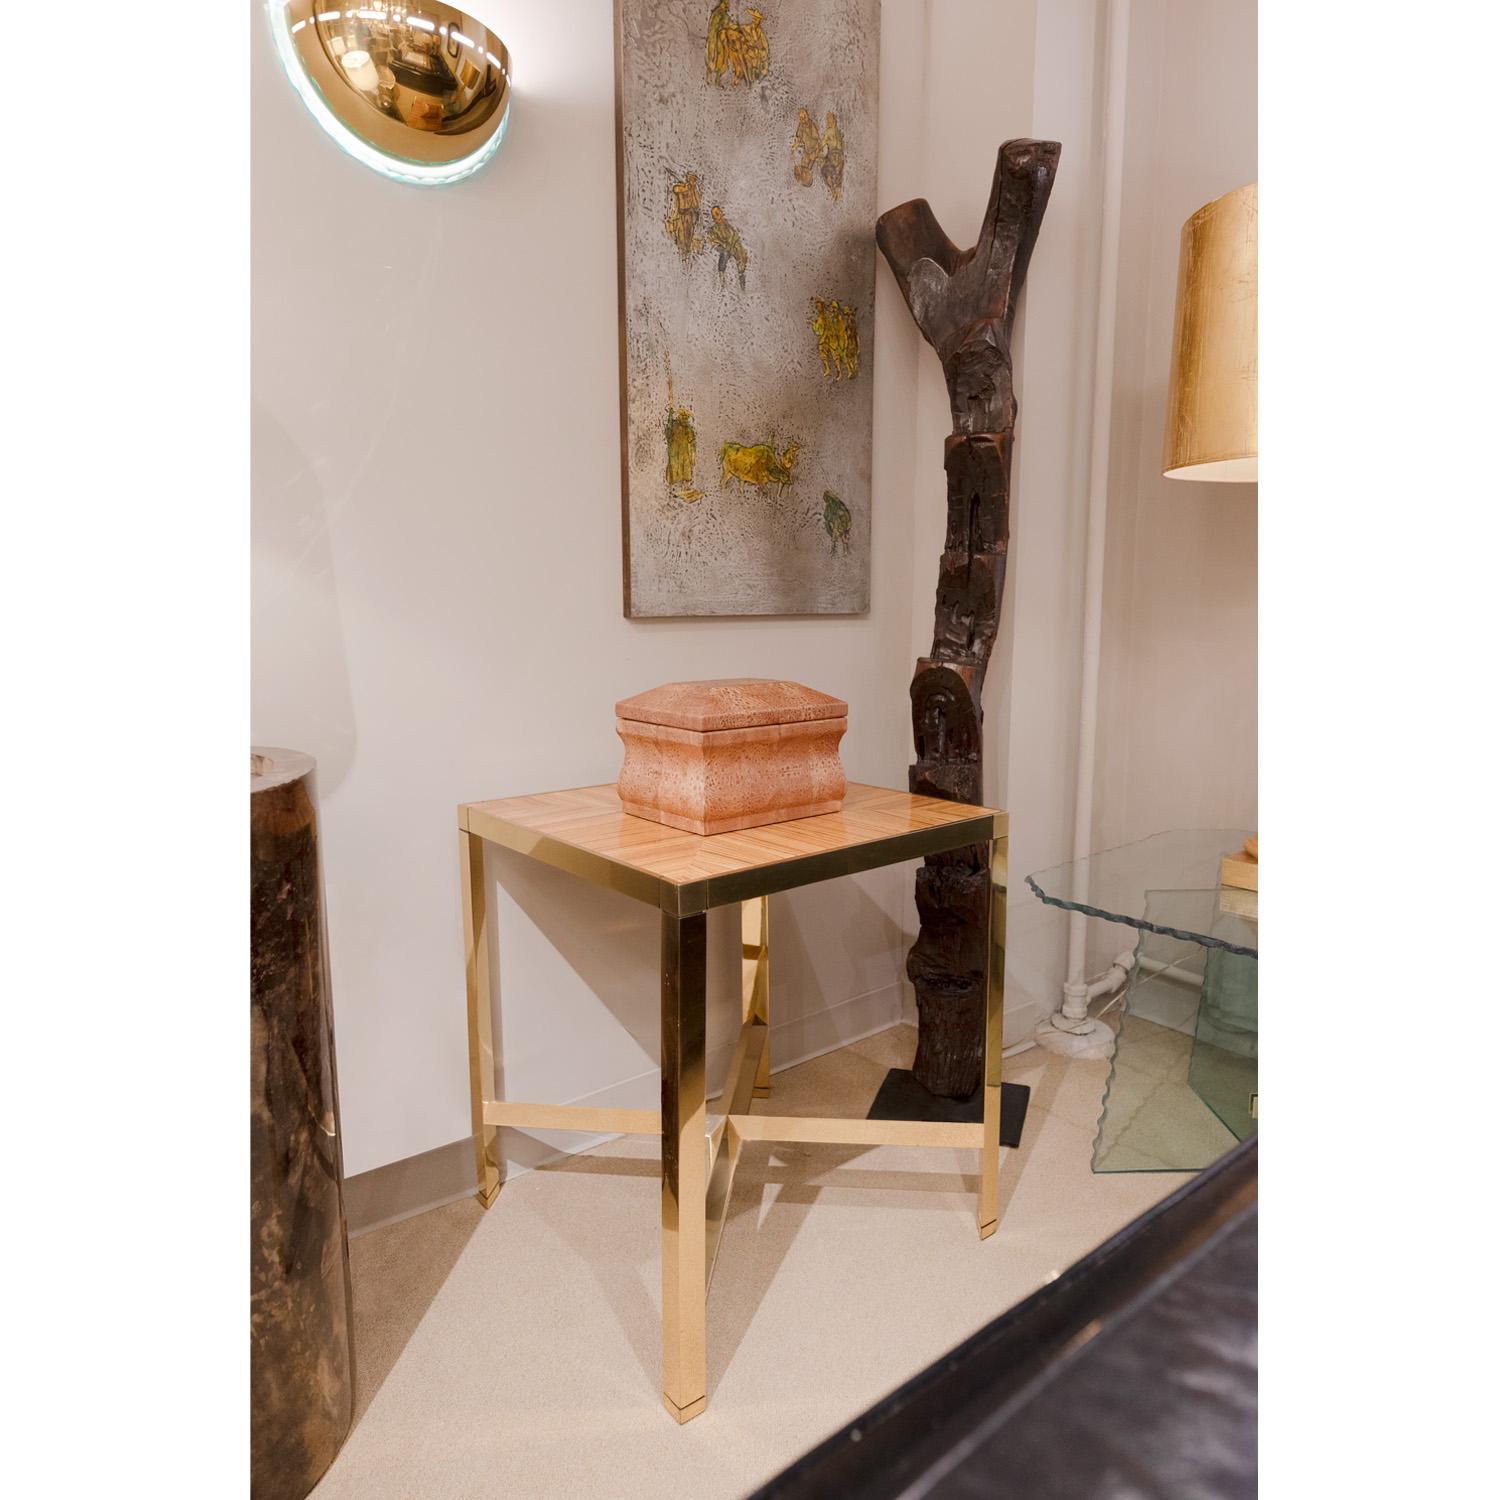 Karl Springer Superbly Crafted End Table in Brass with Zebra Wood Top, 1980s For Sale 2